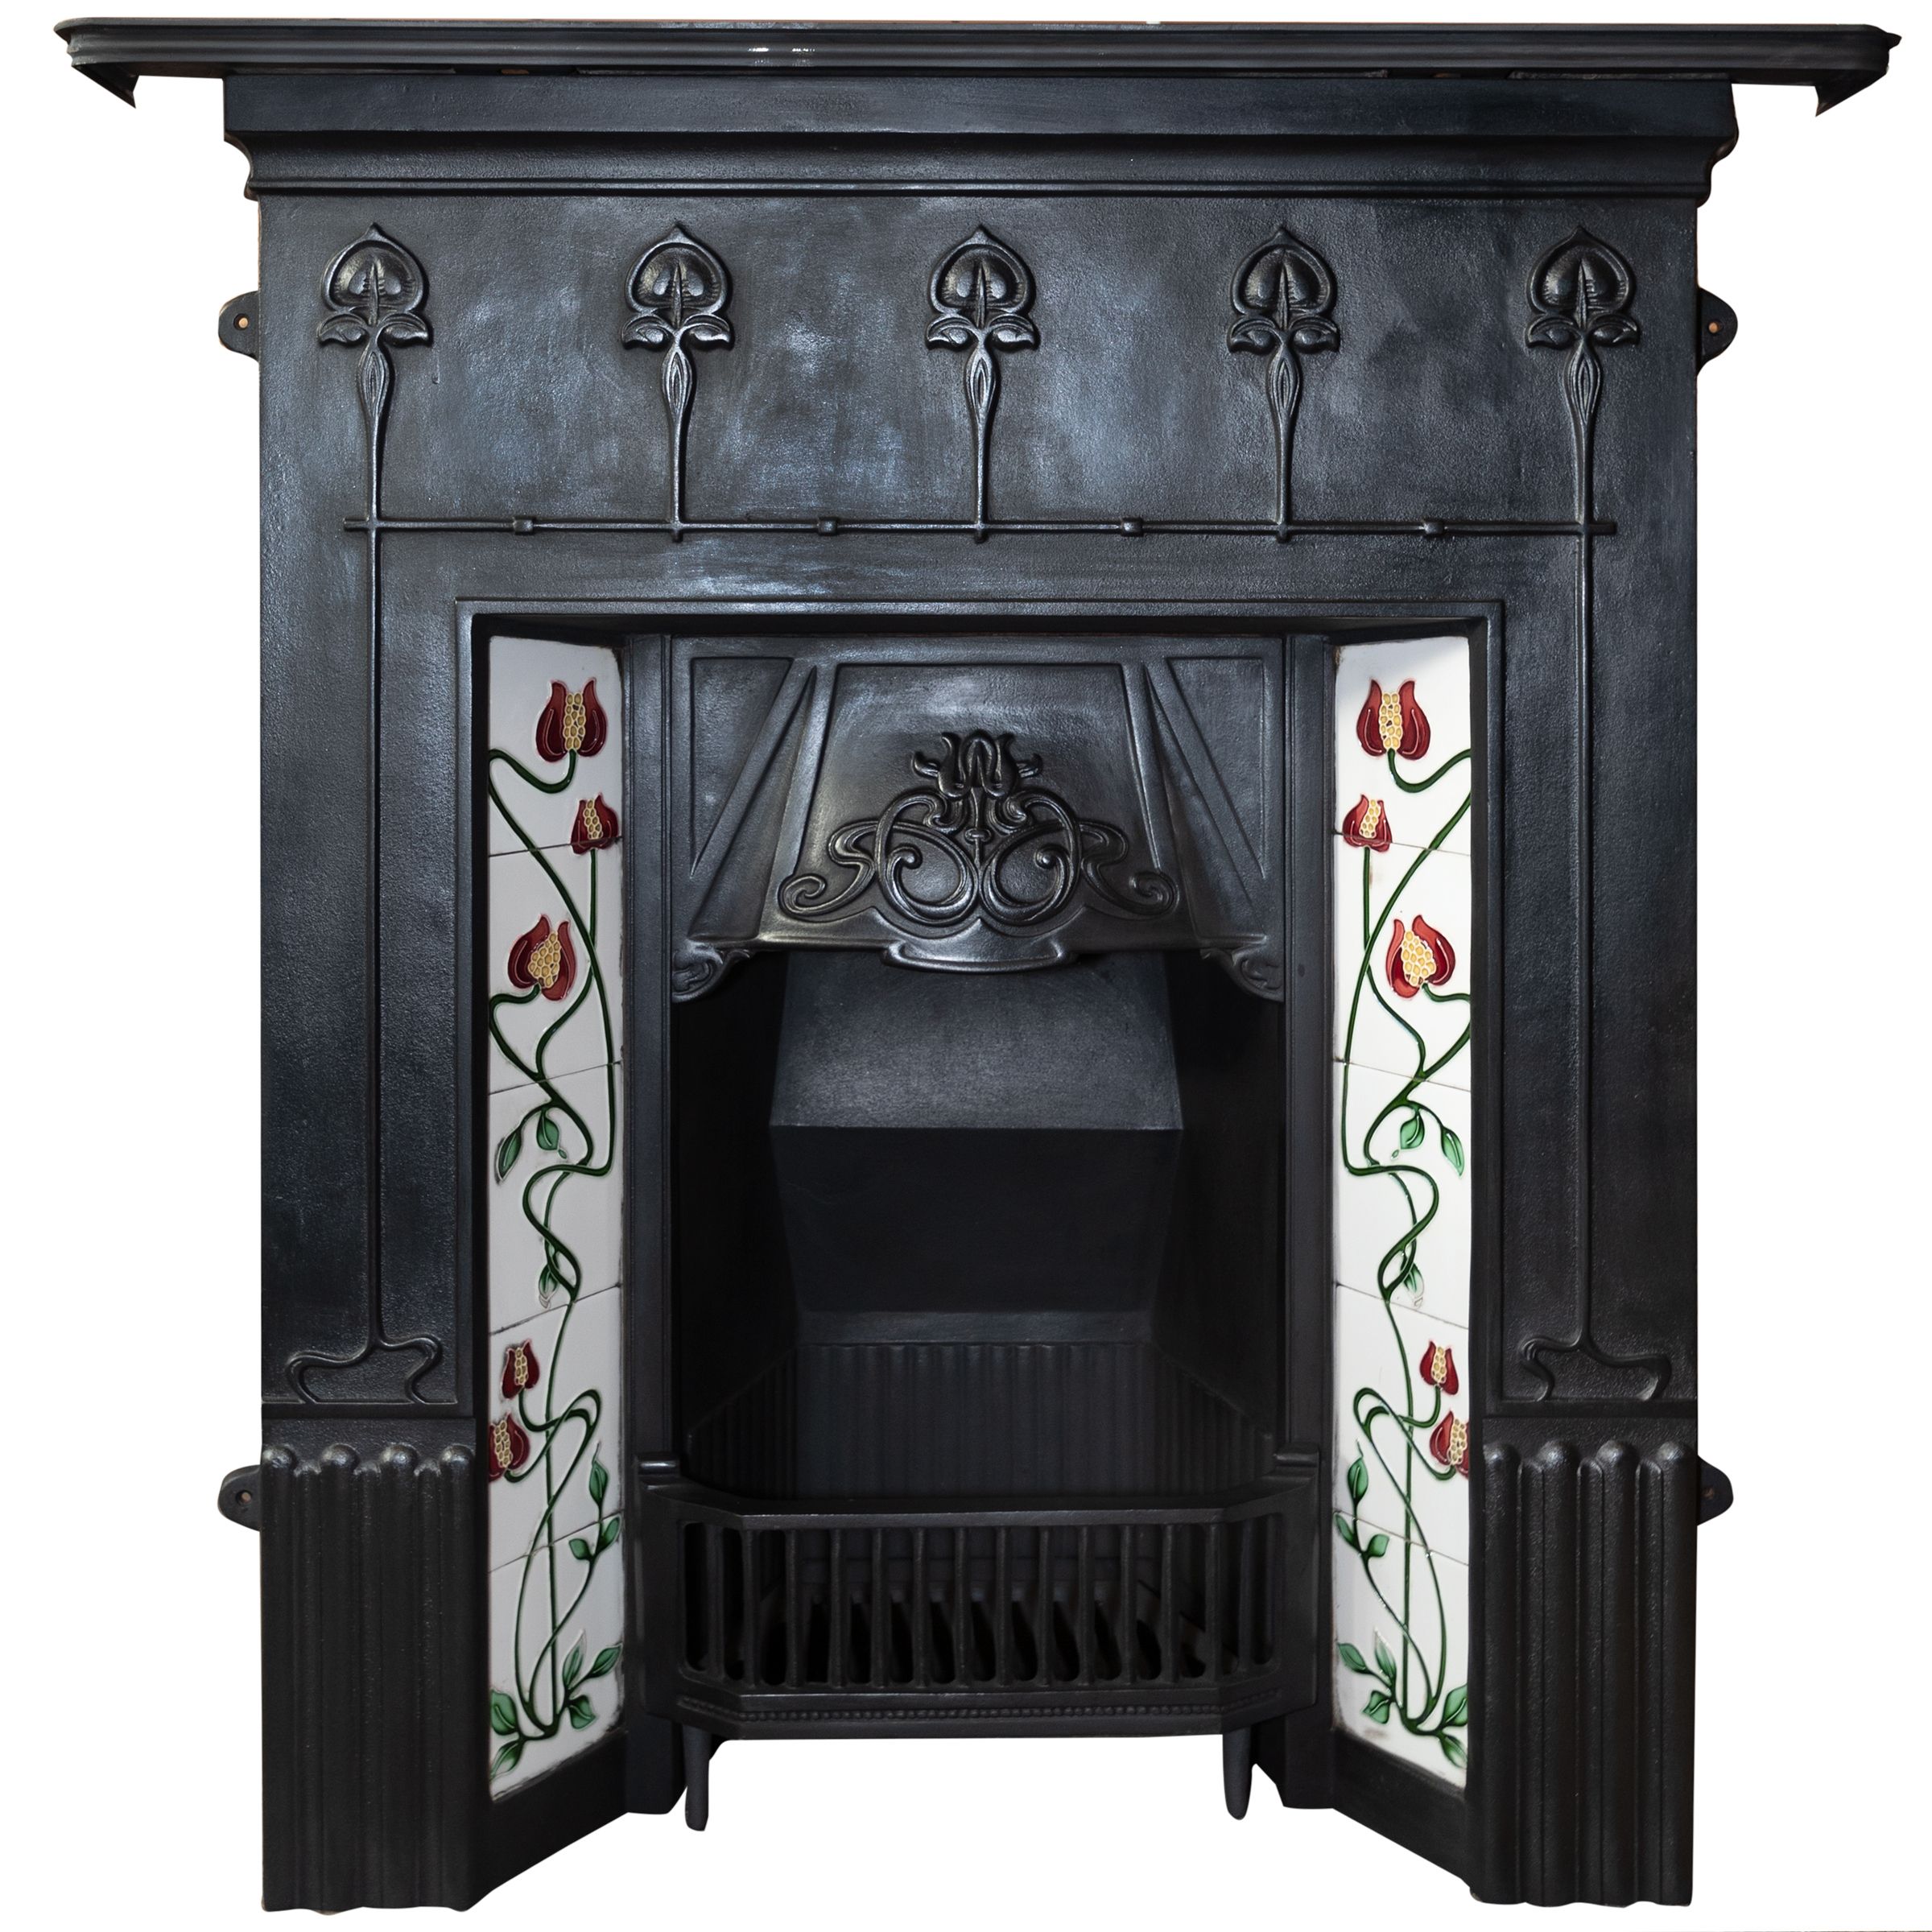 Painting Fireplace Insert Best Of Huge Selection Of Antique Cast Iron Fireplaces Fully